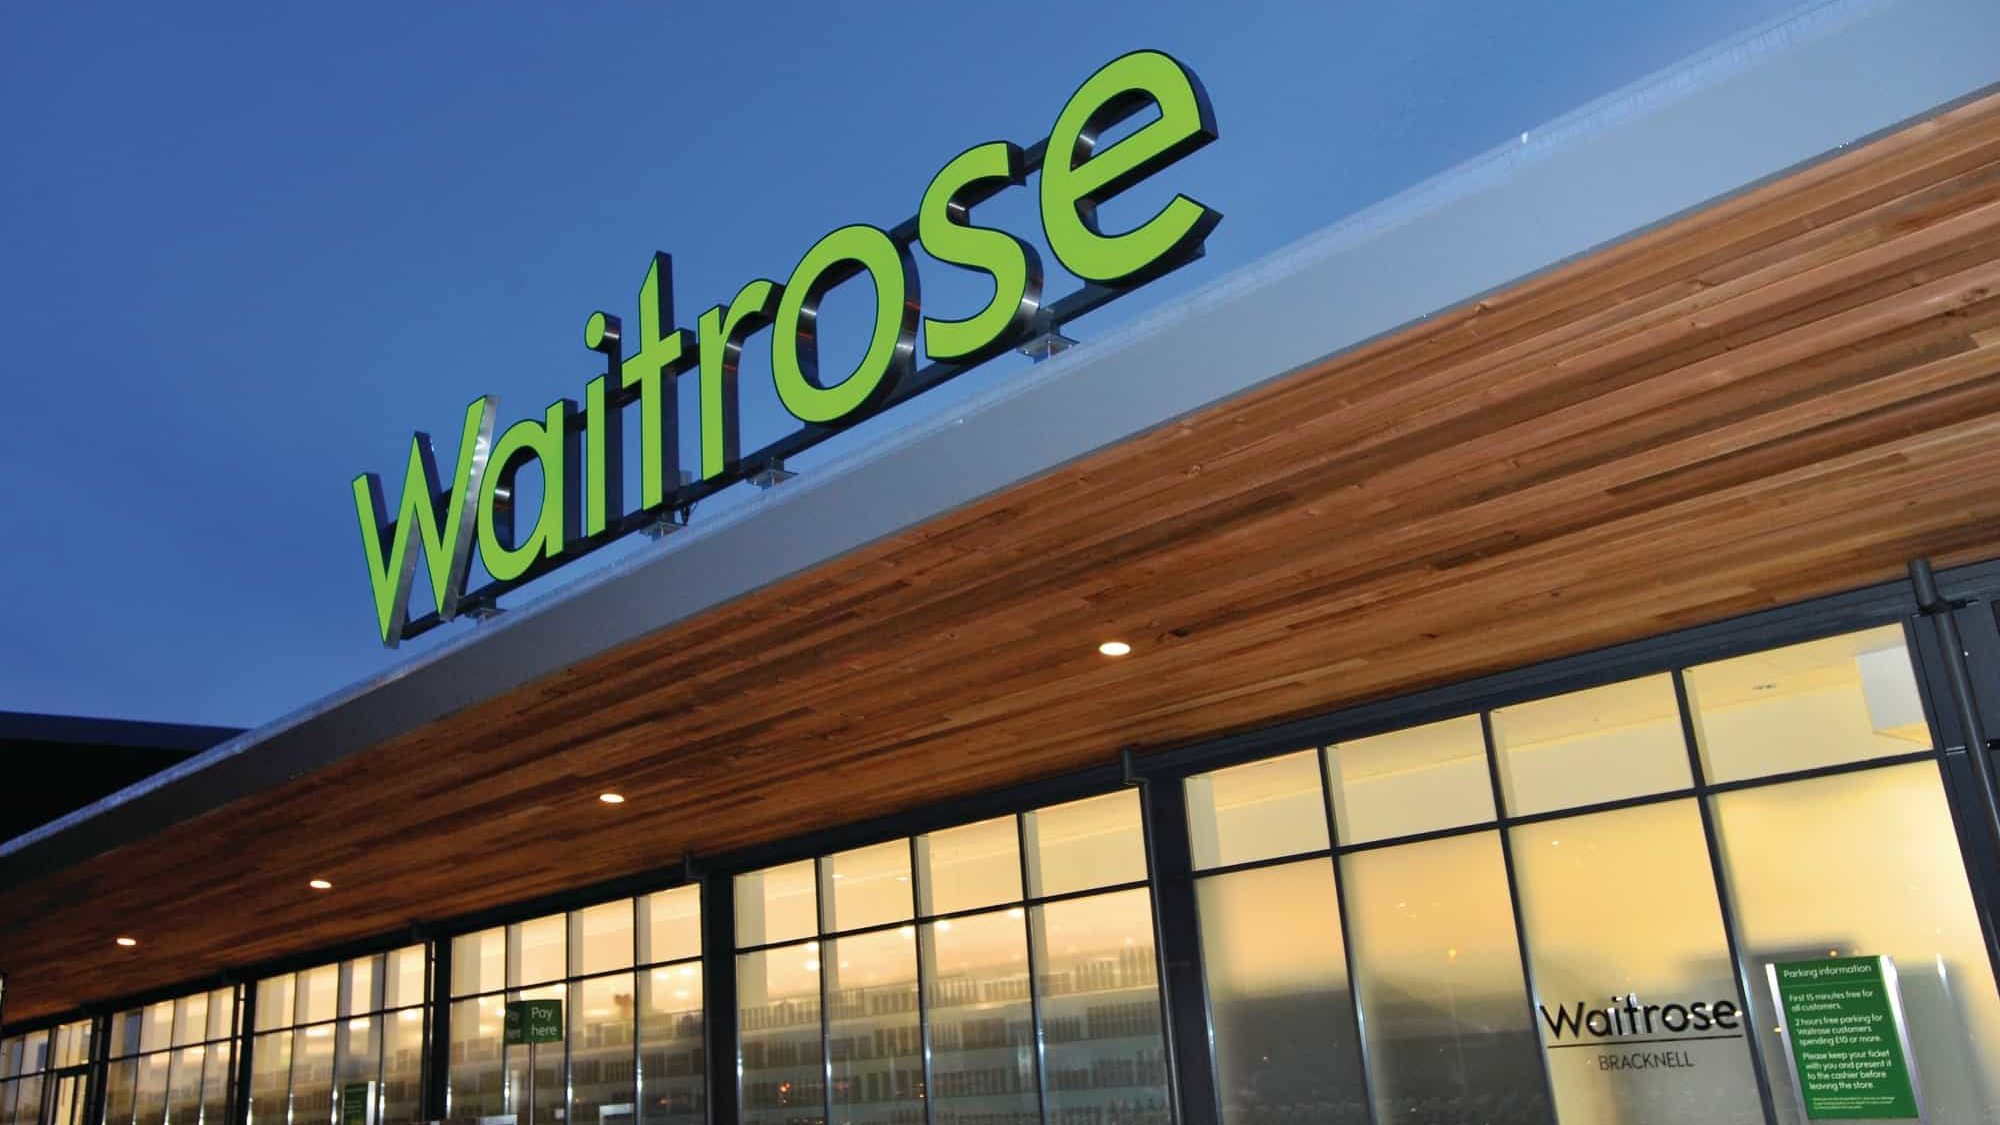 Ross Avery promoted by Waitrose